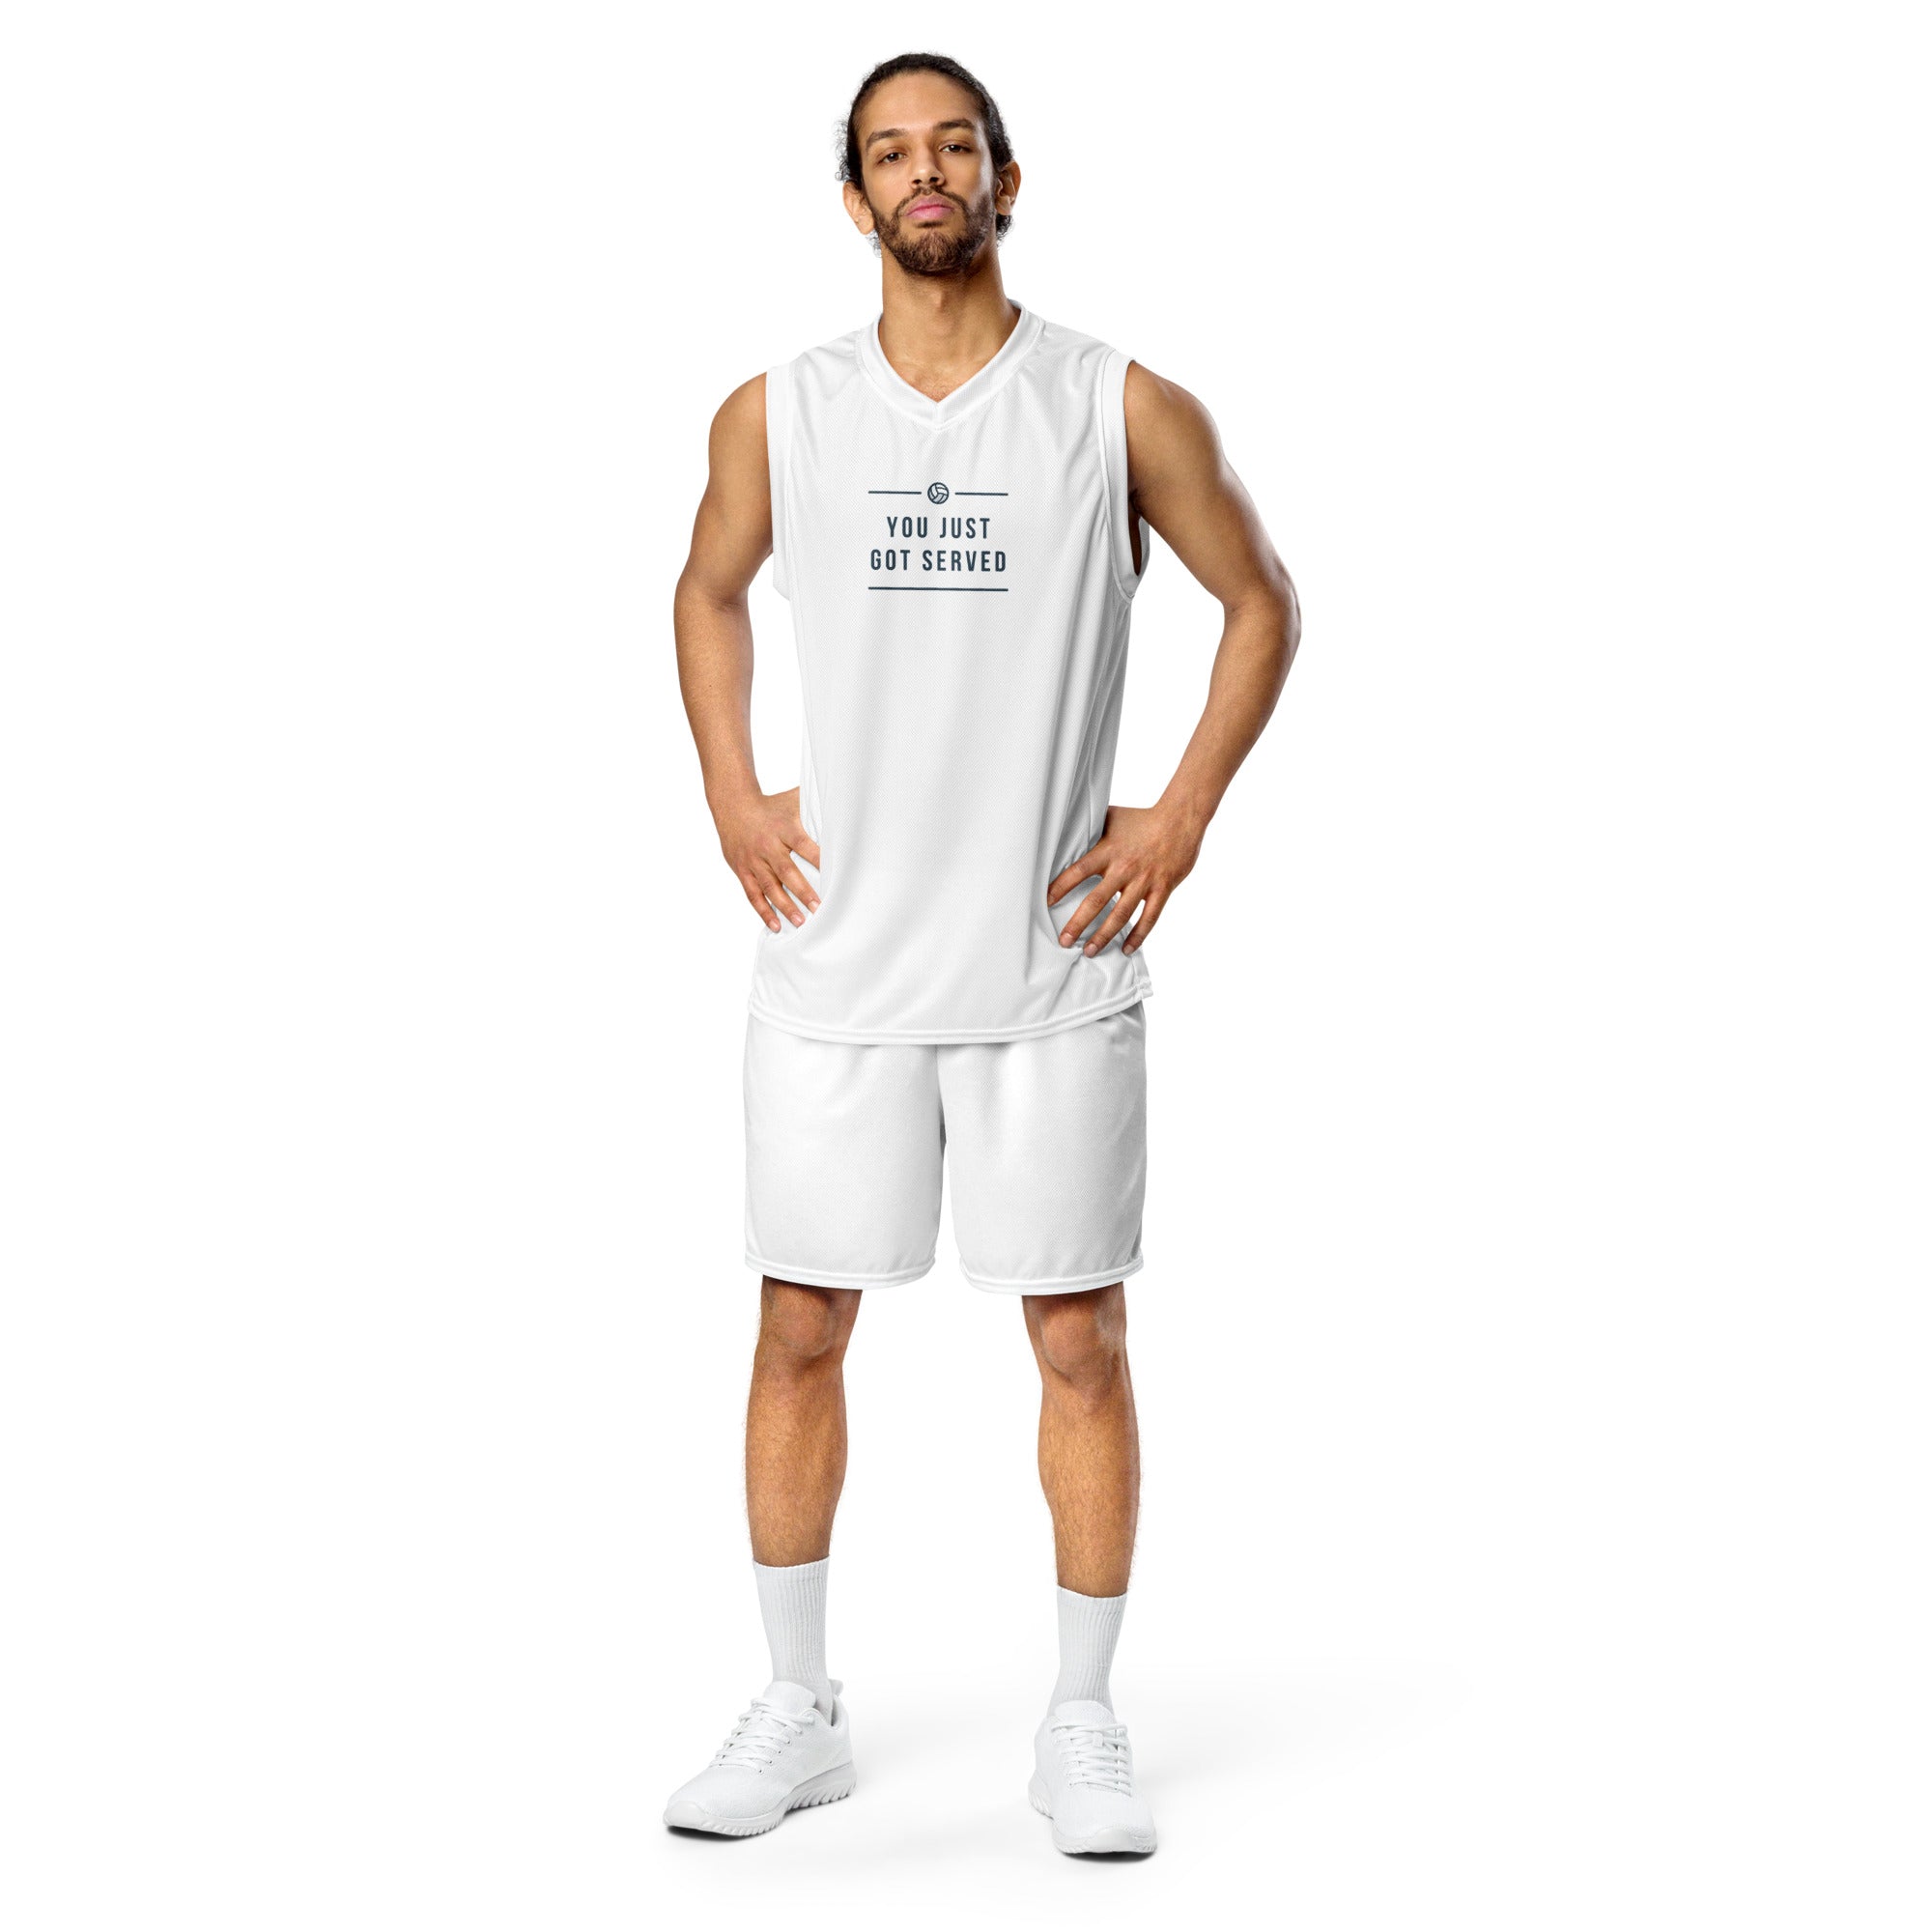 Recycled unisex basketball jersey You Just Got served - SportsGO